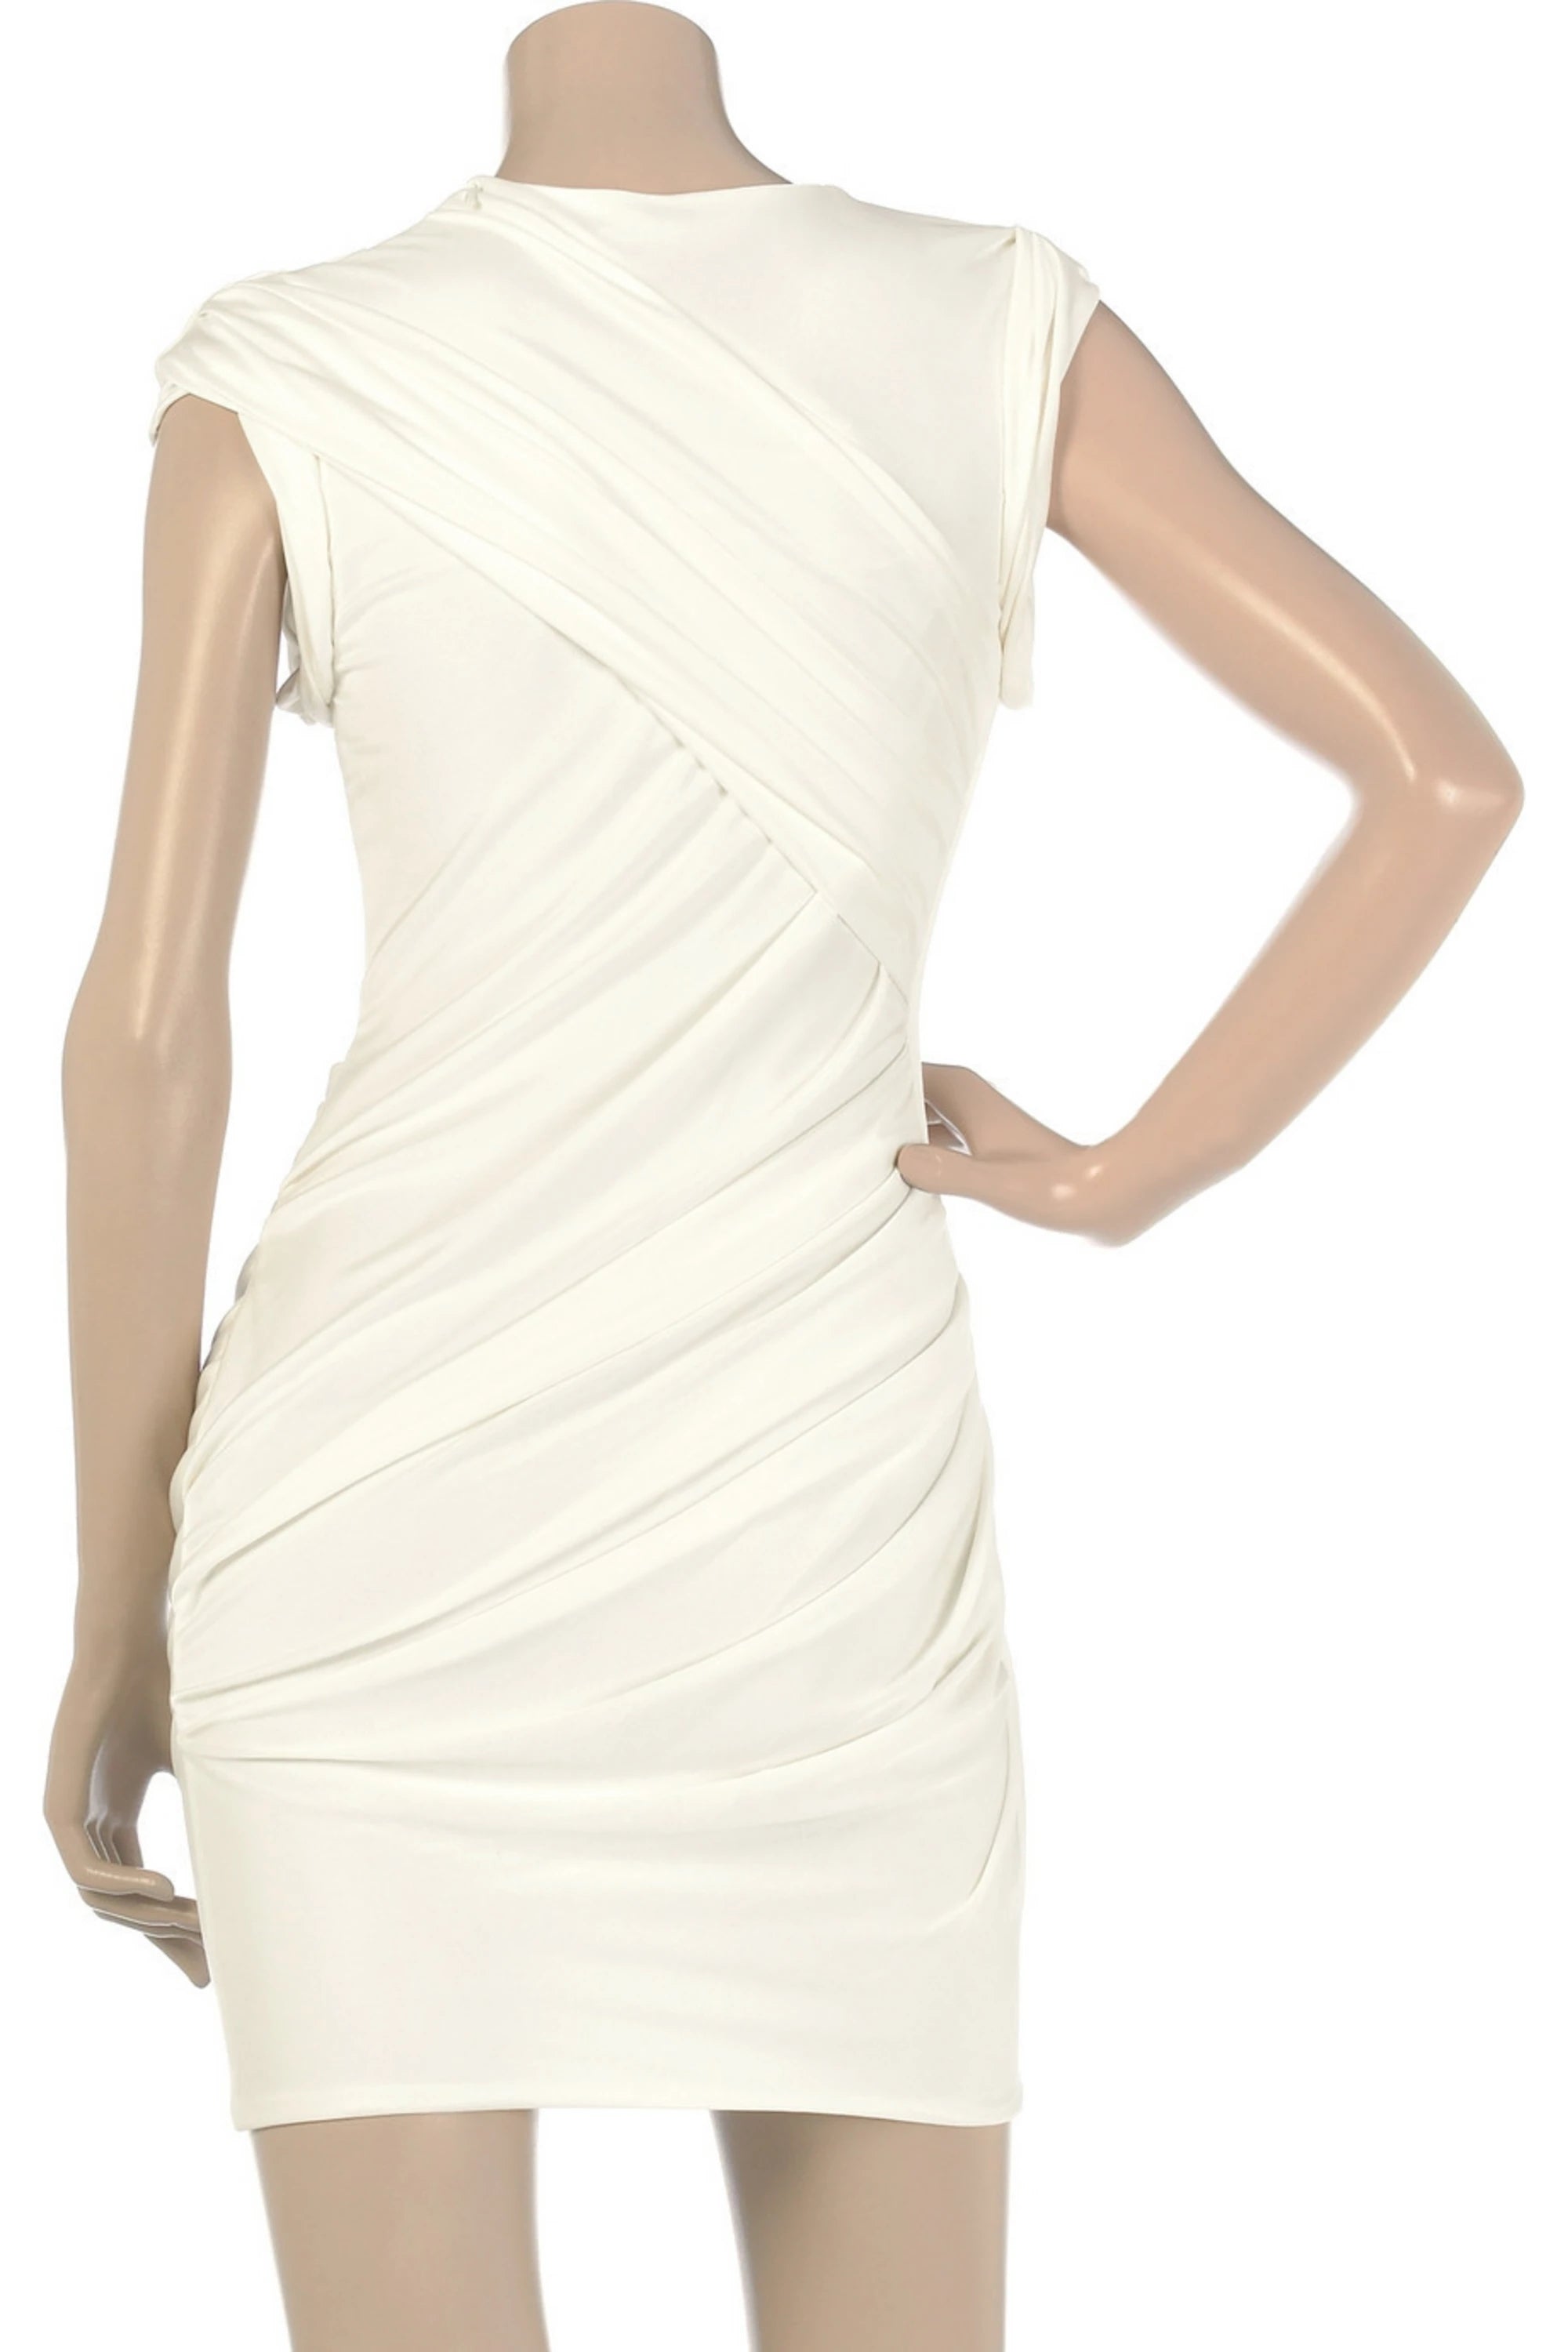 White draped  sleeveless ruched jersy bodycon mini  cocktail party dress